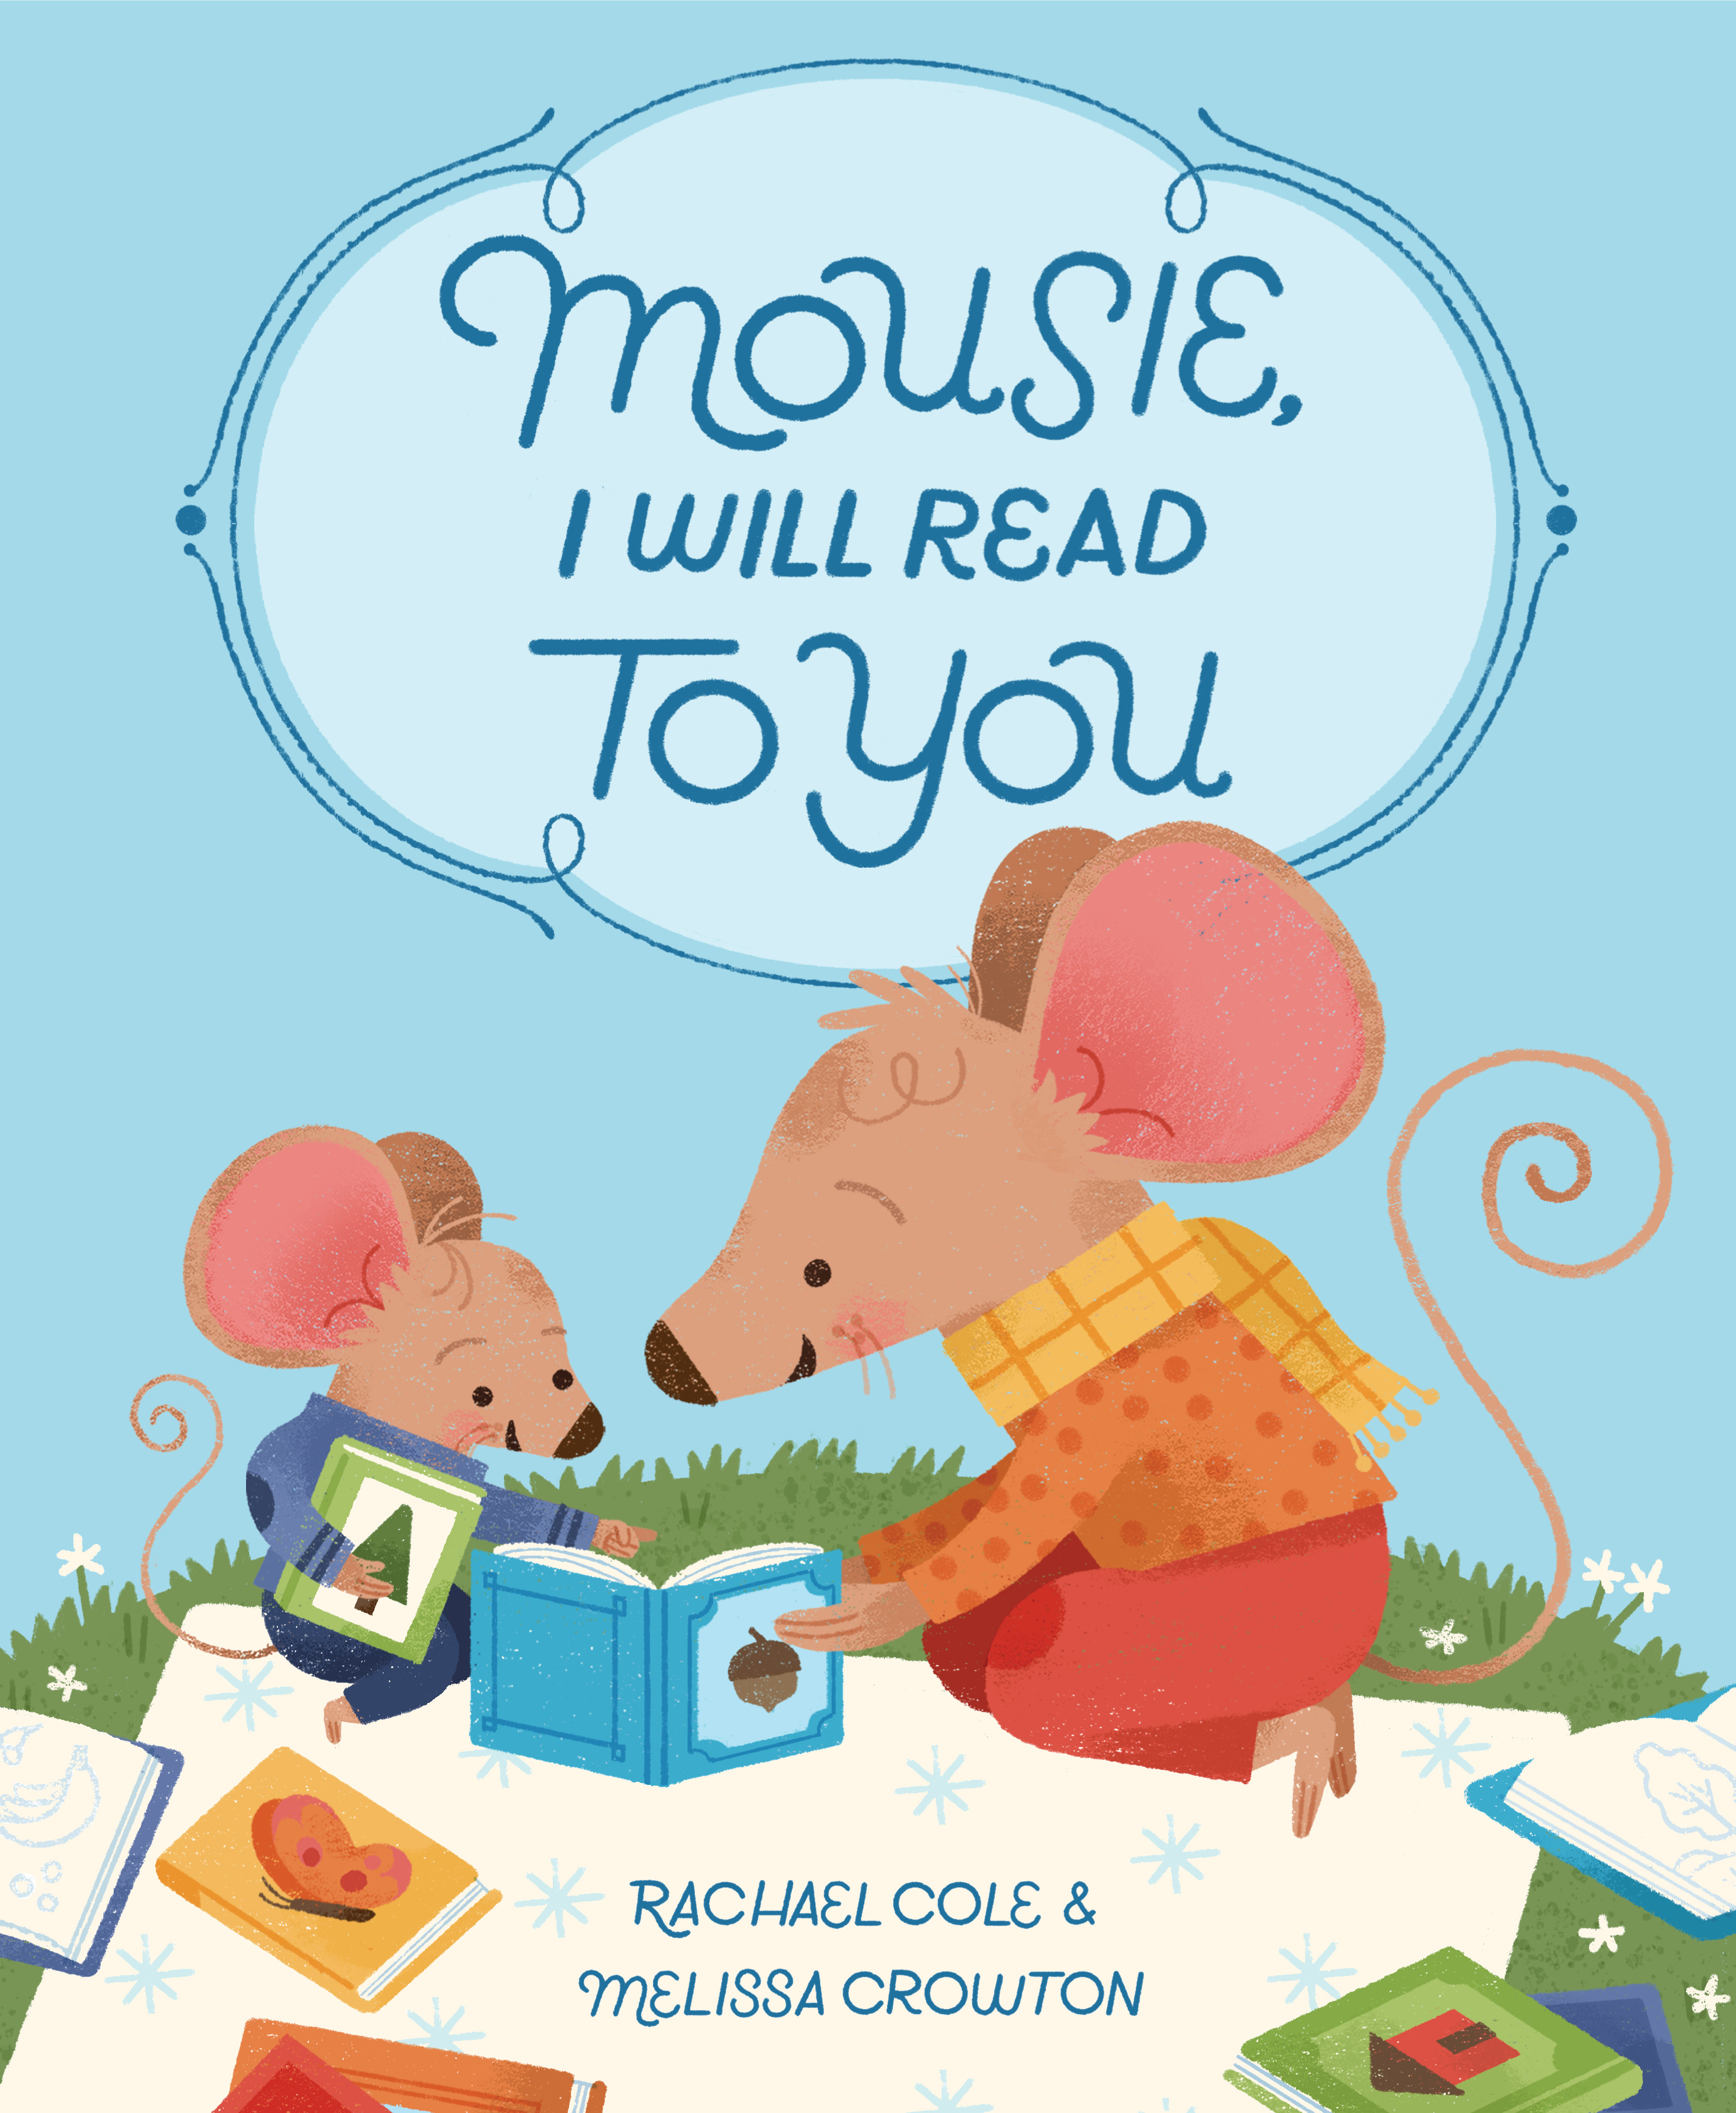 Sunday Story Time with Rachael Cole (Author of Mousie, I Will Read to You)